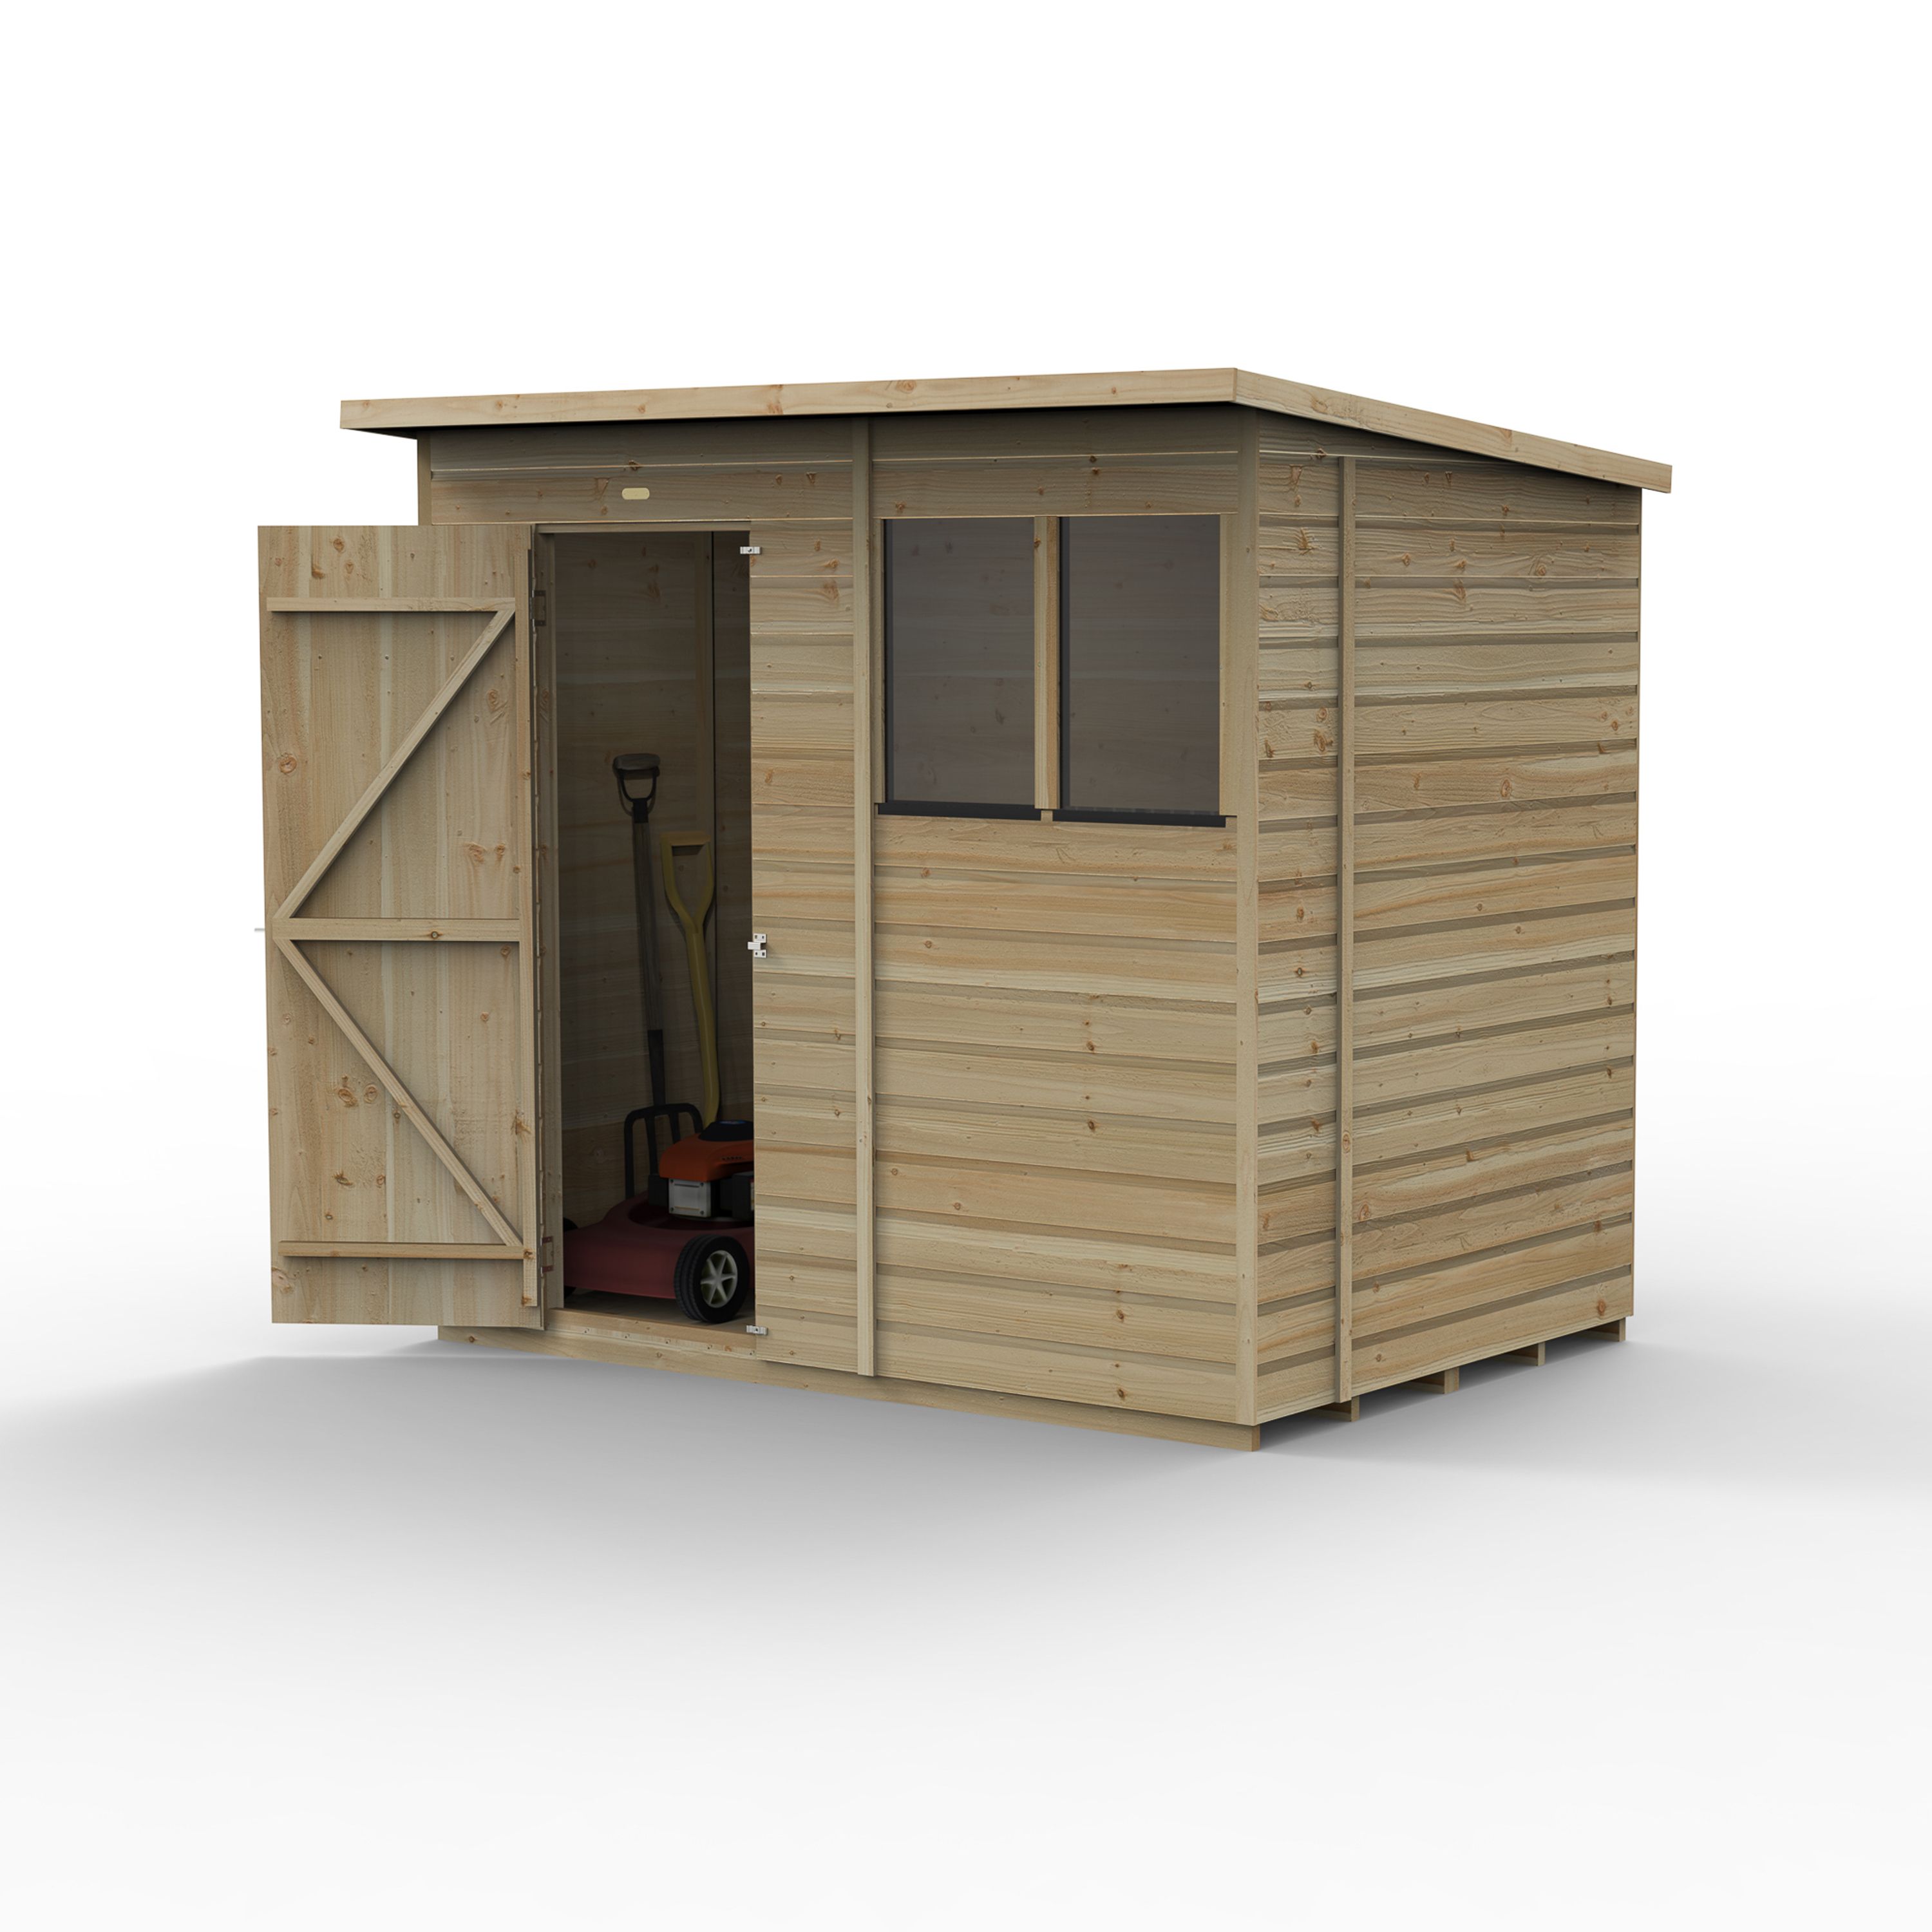 Forest Garden Beckwood 7x5 ft Pent Natural timber Wooden Shed with floor & 2 windows - Assembly not required